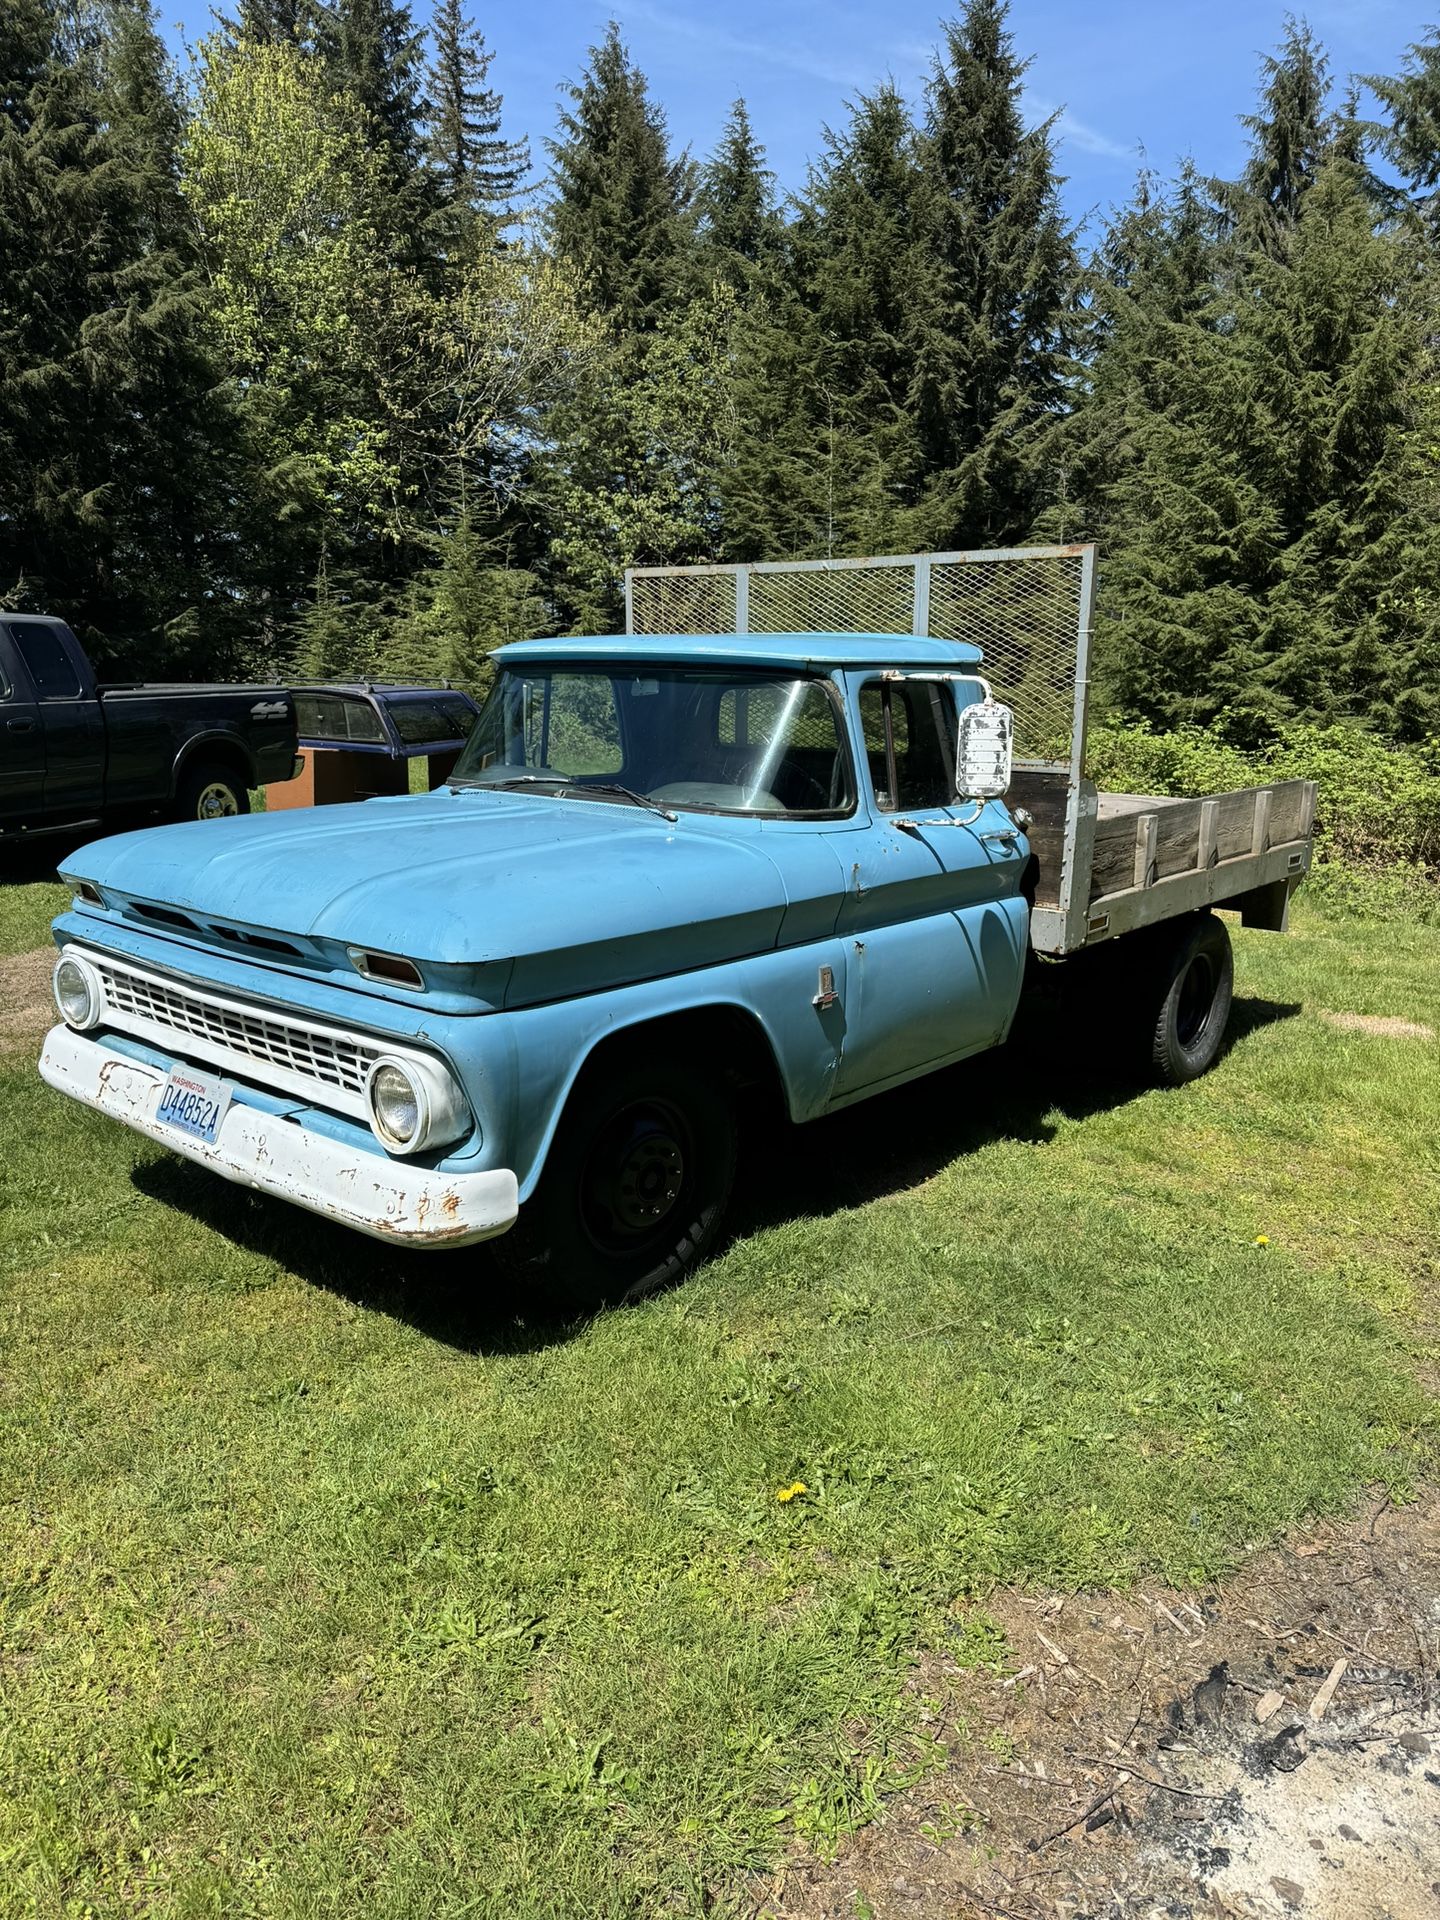 1963 Chevrolet C-30 One Ton Dually Flatbed Truck